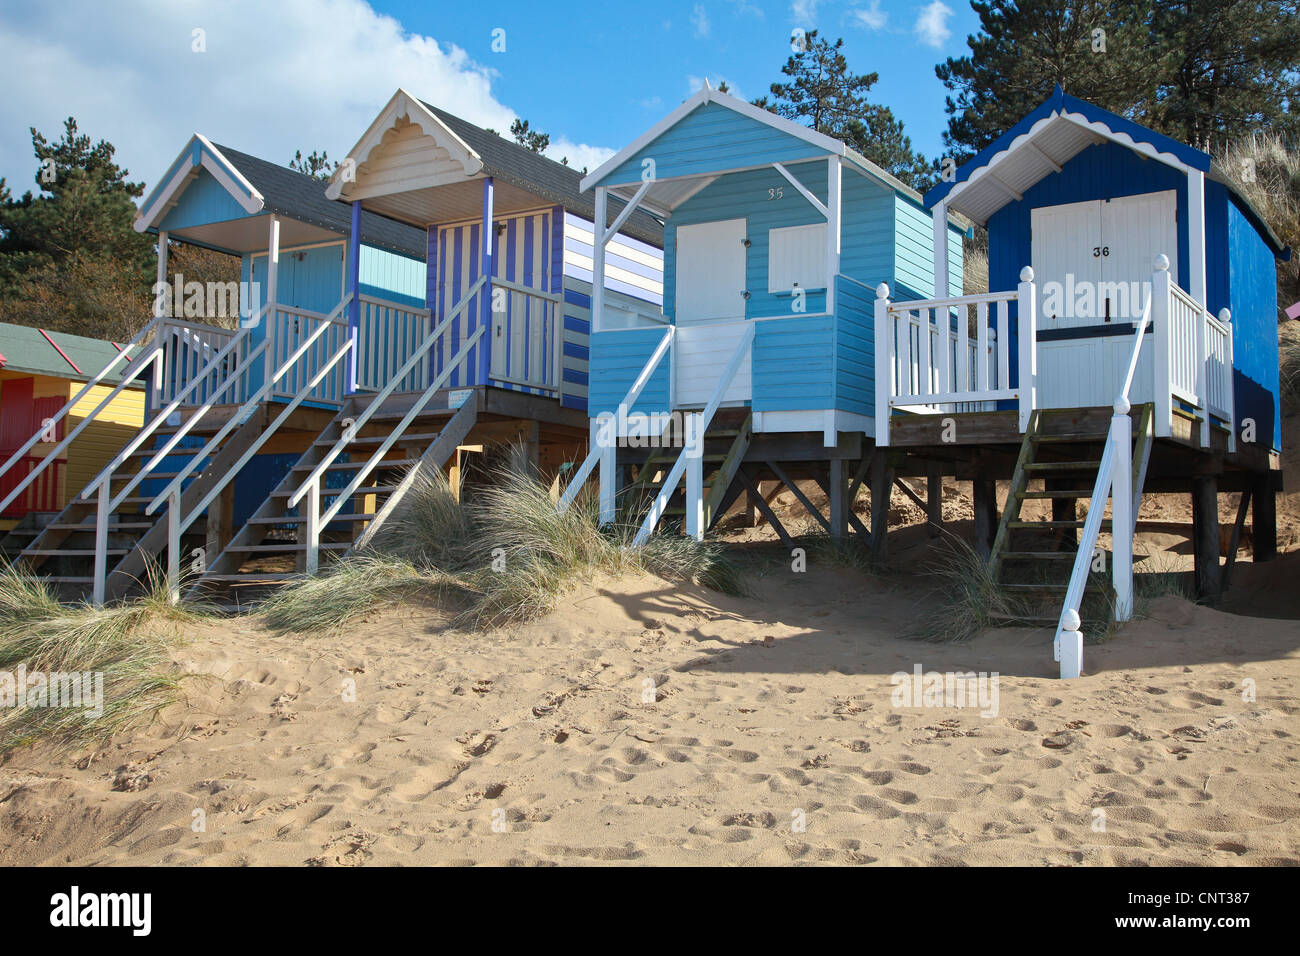 Beach huts, sand, holiday, summer, sun, in the UK, vacation, sea side, huts Stock Photo